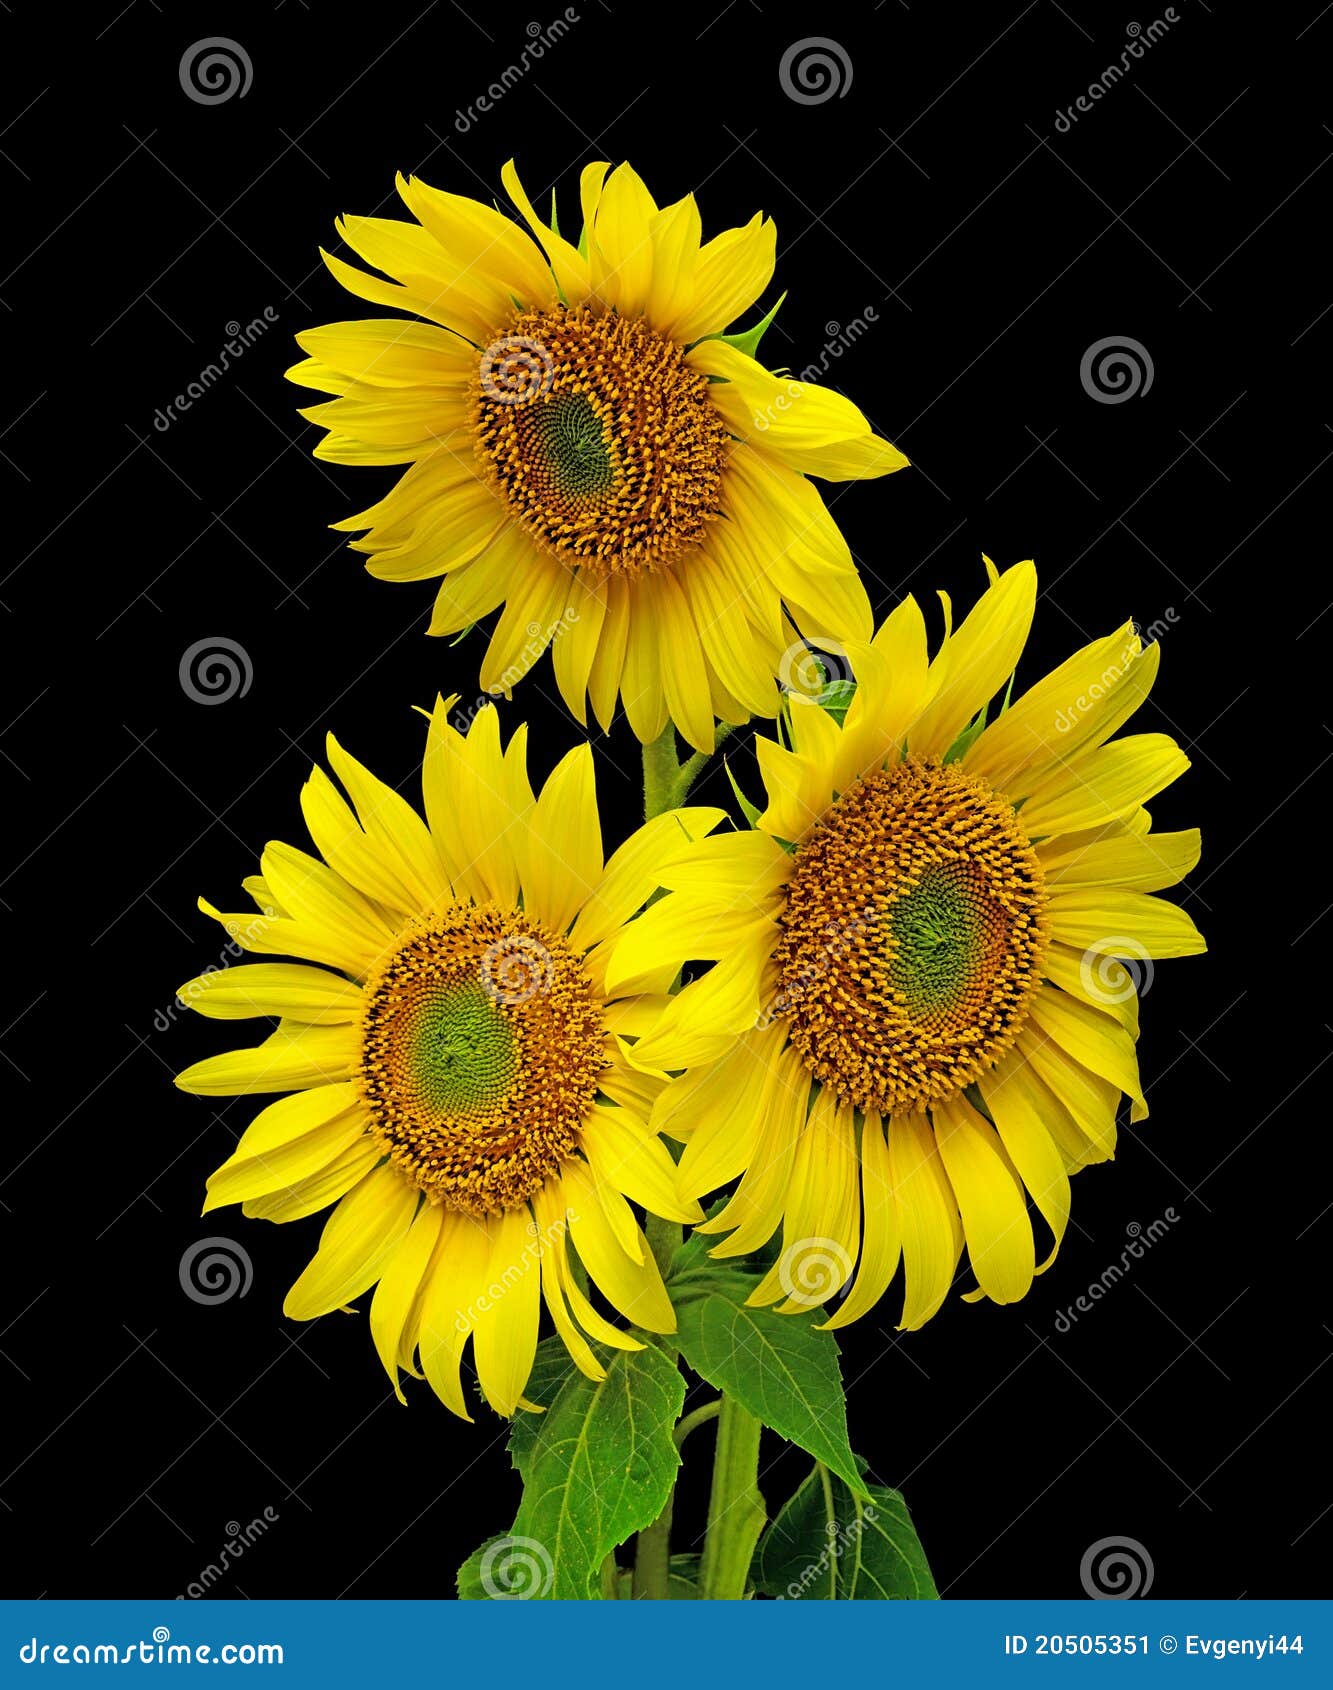 Sunflowers on a Black Background Stock Image - Image of summer, growing